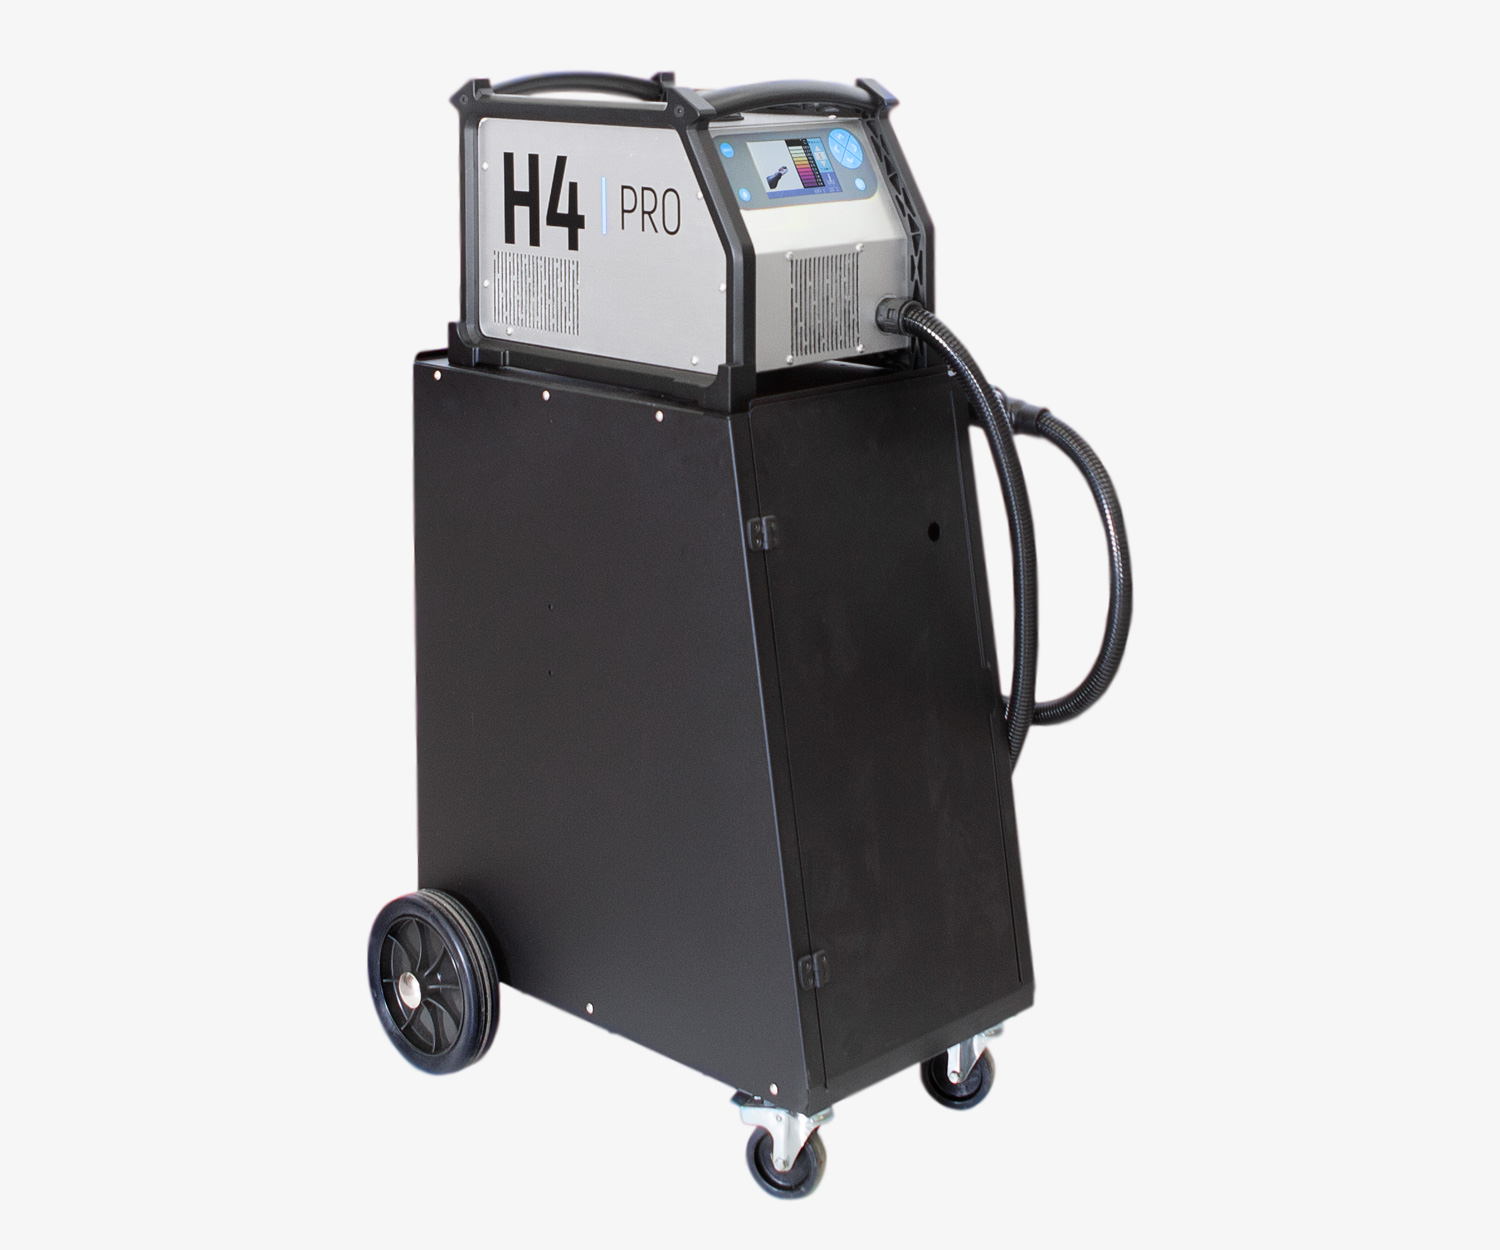 H4PRO mobile induction heater